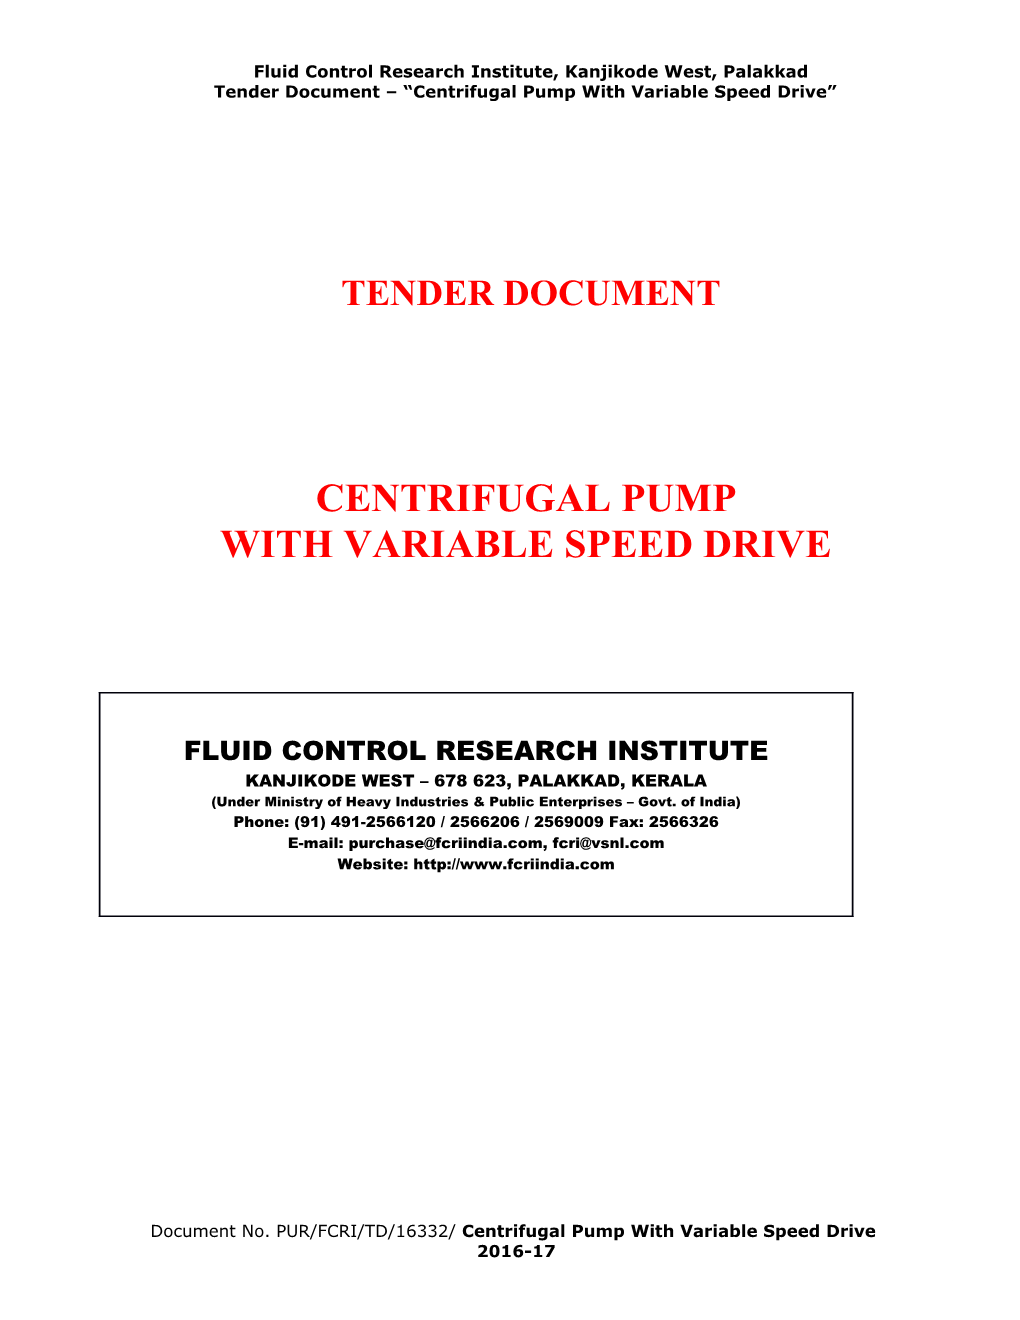 Tender Document Centrifugal Pump with Variable Speed Drive